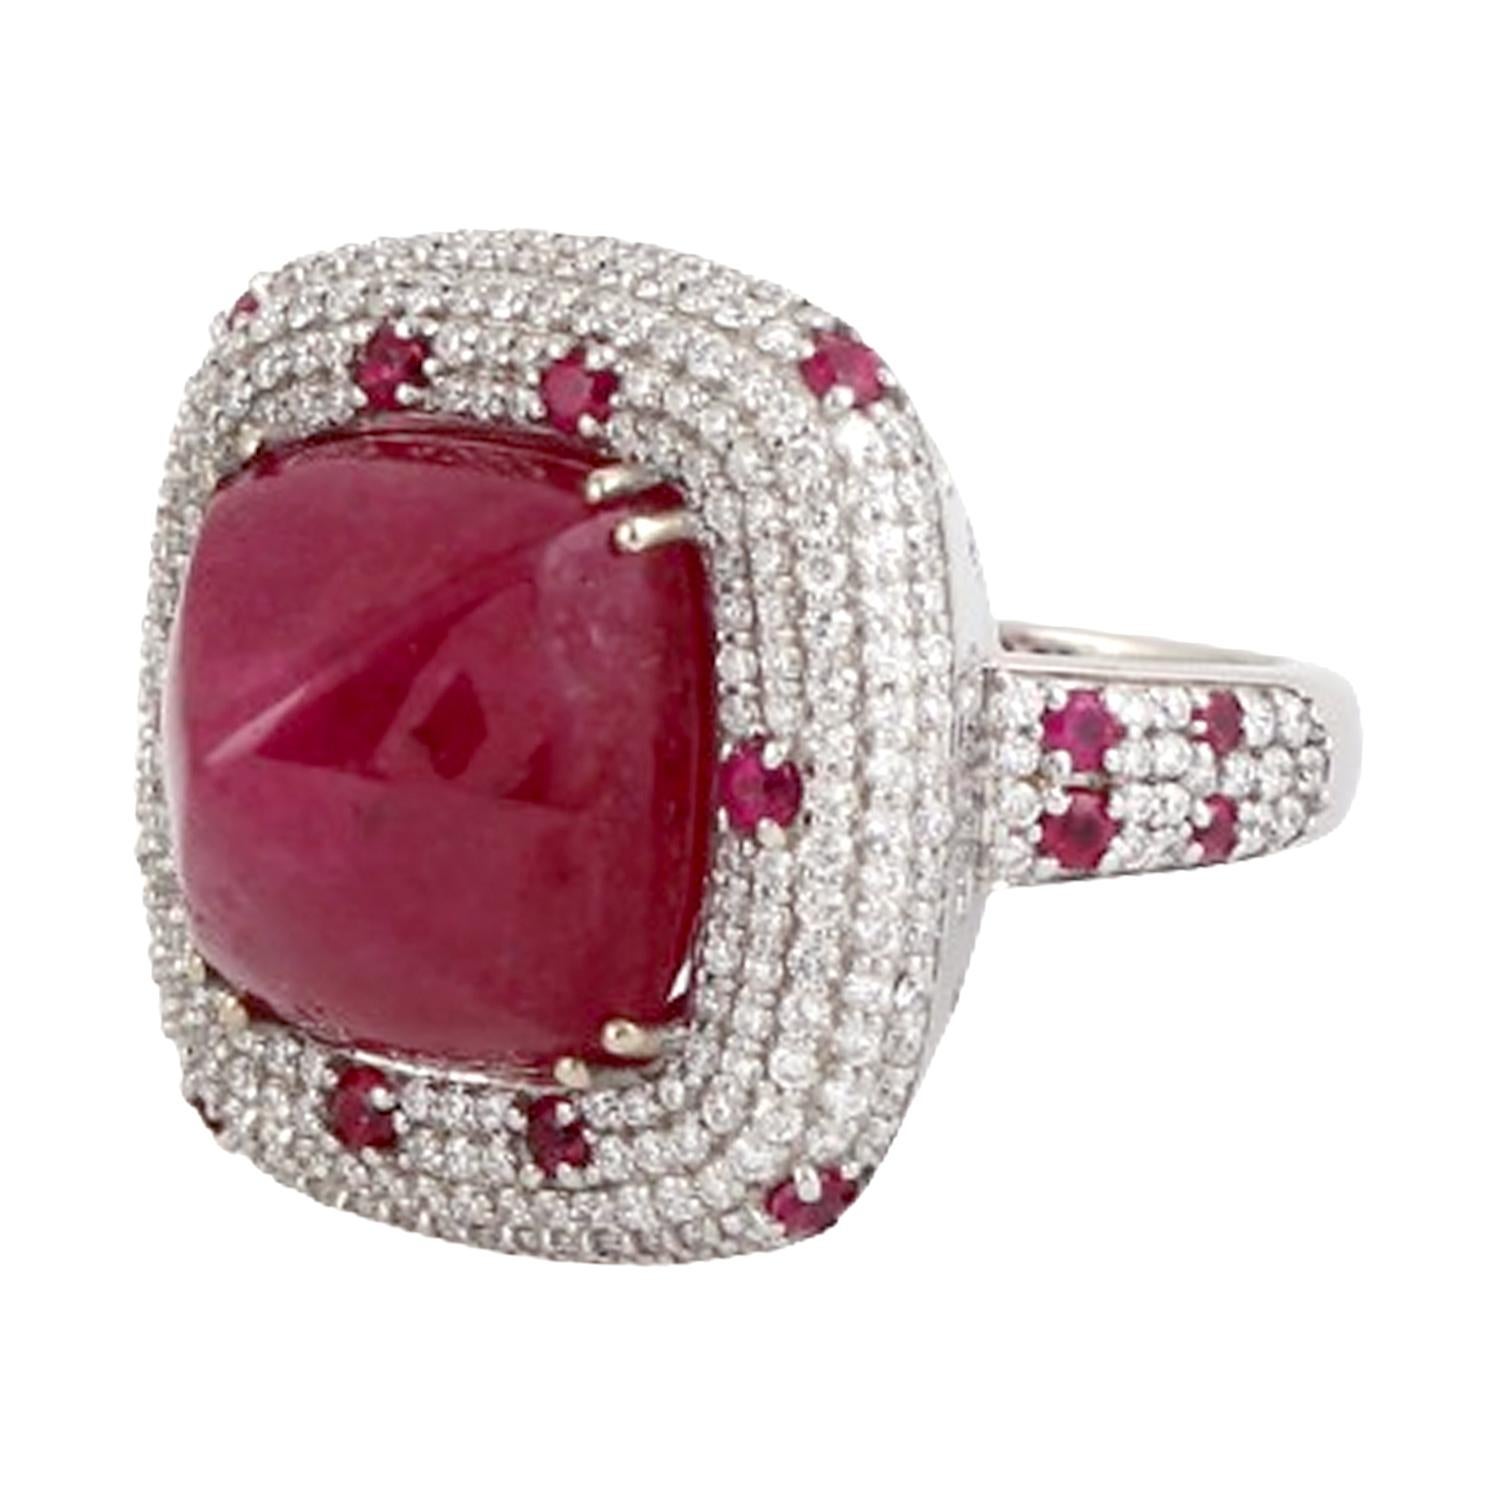 Art Deco Sugarloaf Cab Cushion Shaped Mosambic Ruby Cocktail Ring With Diamonds For Sale